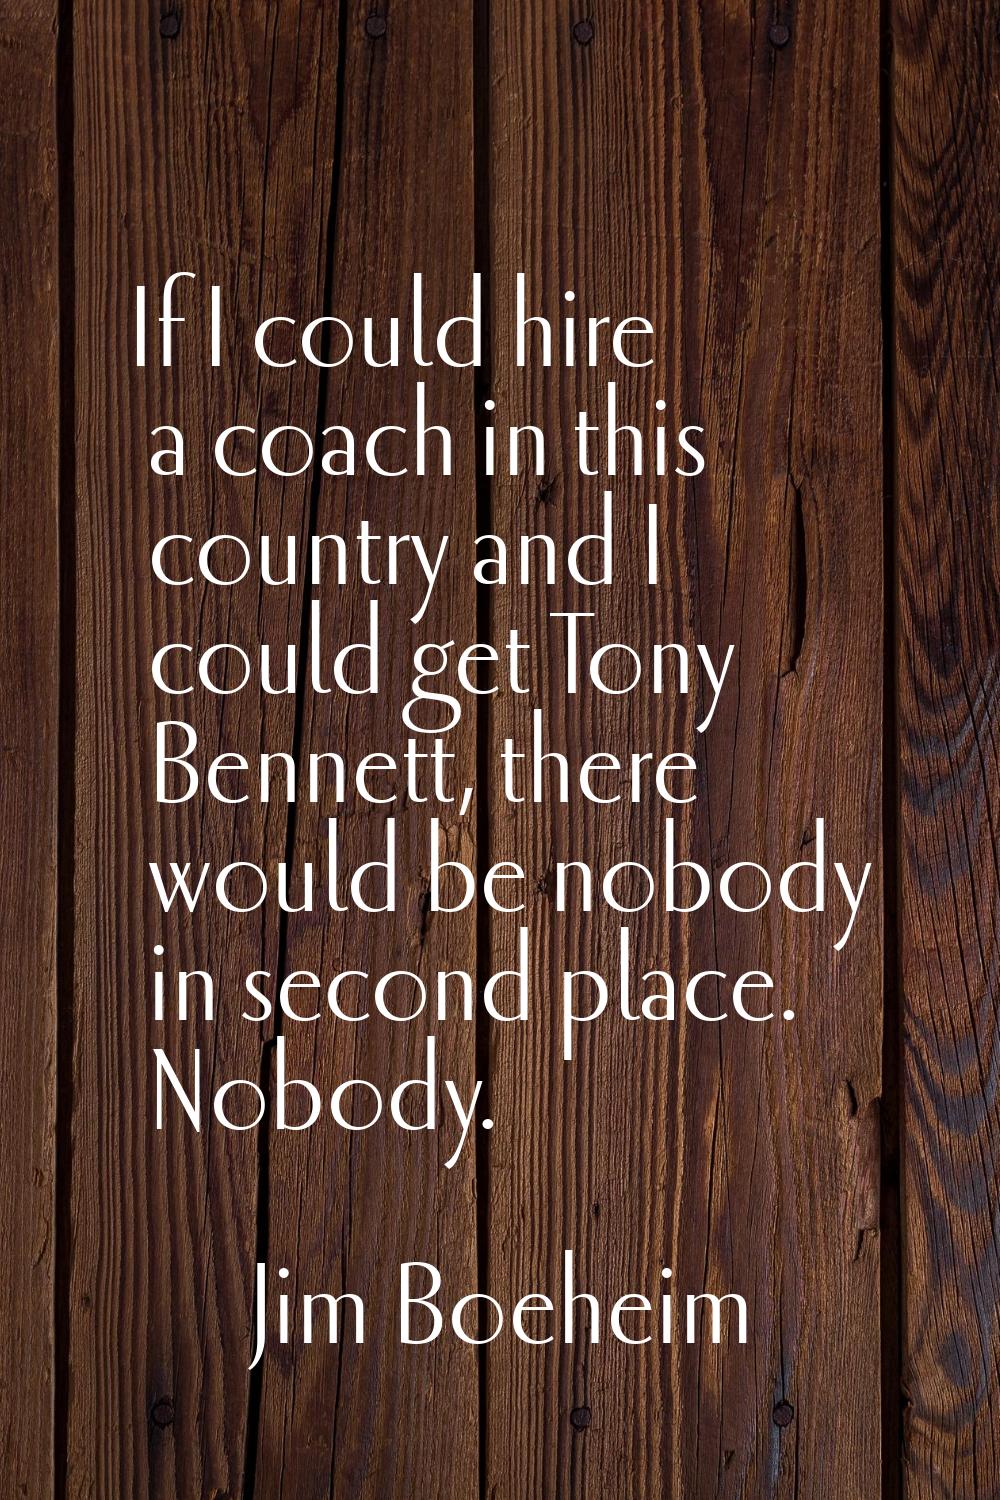 If I could hire a coach in this country and I could get Tony Bennett, there would be nobody in seco